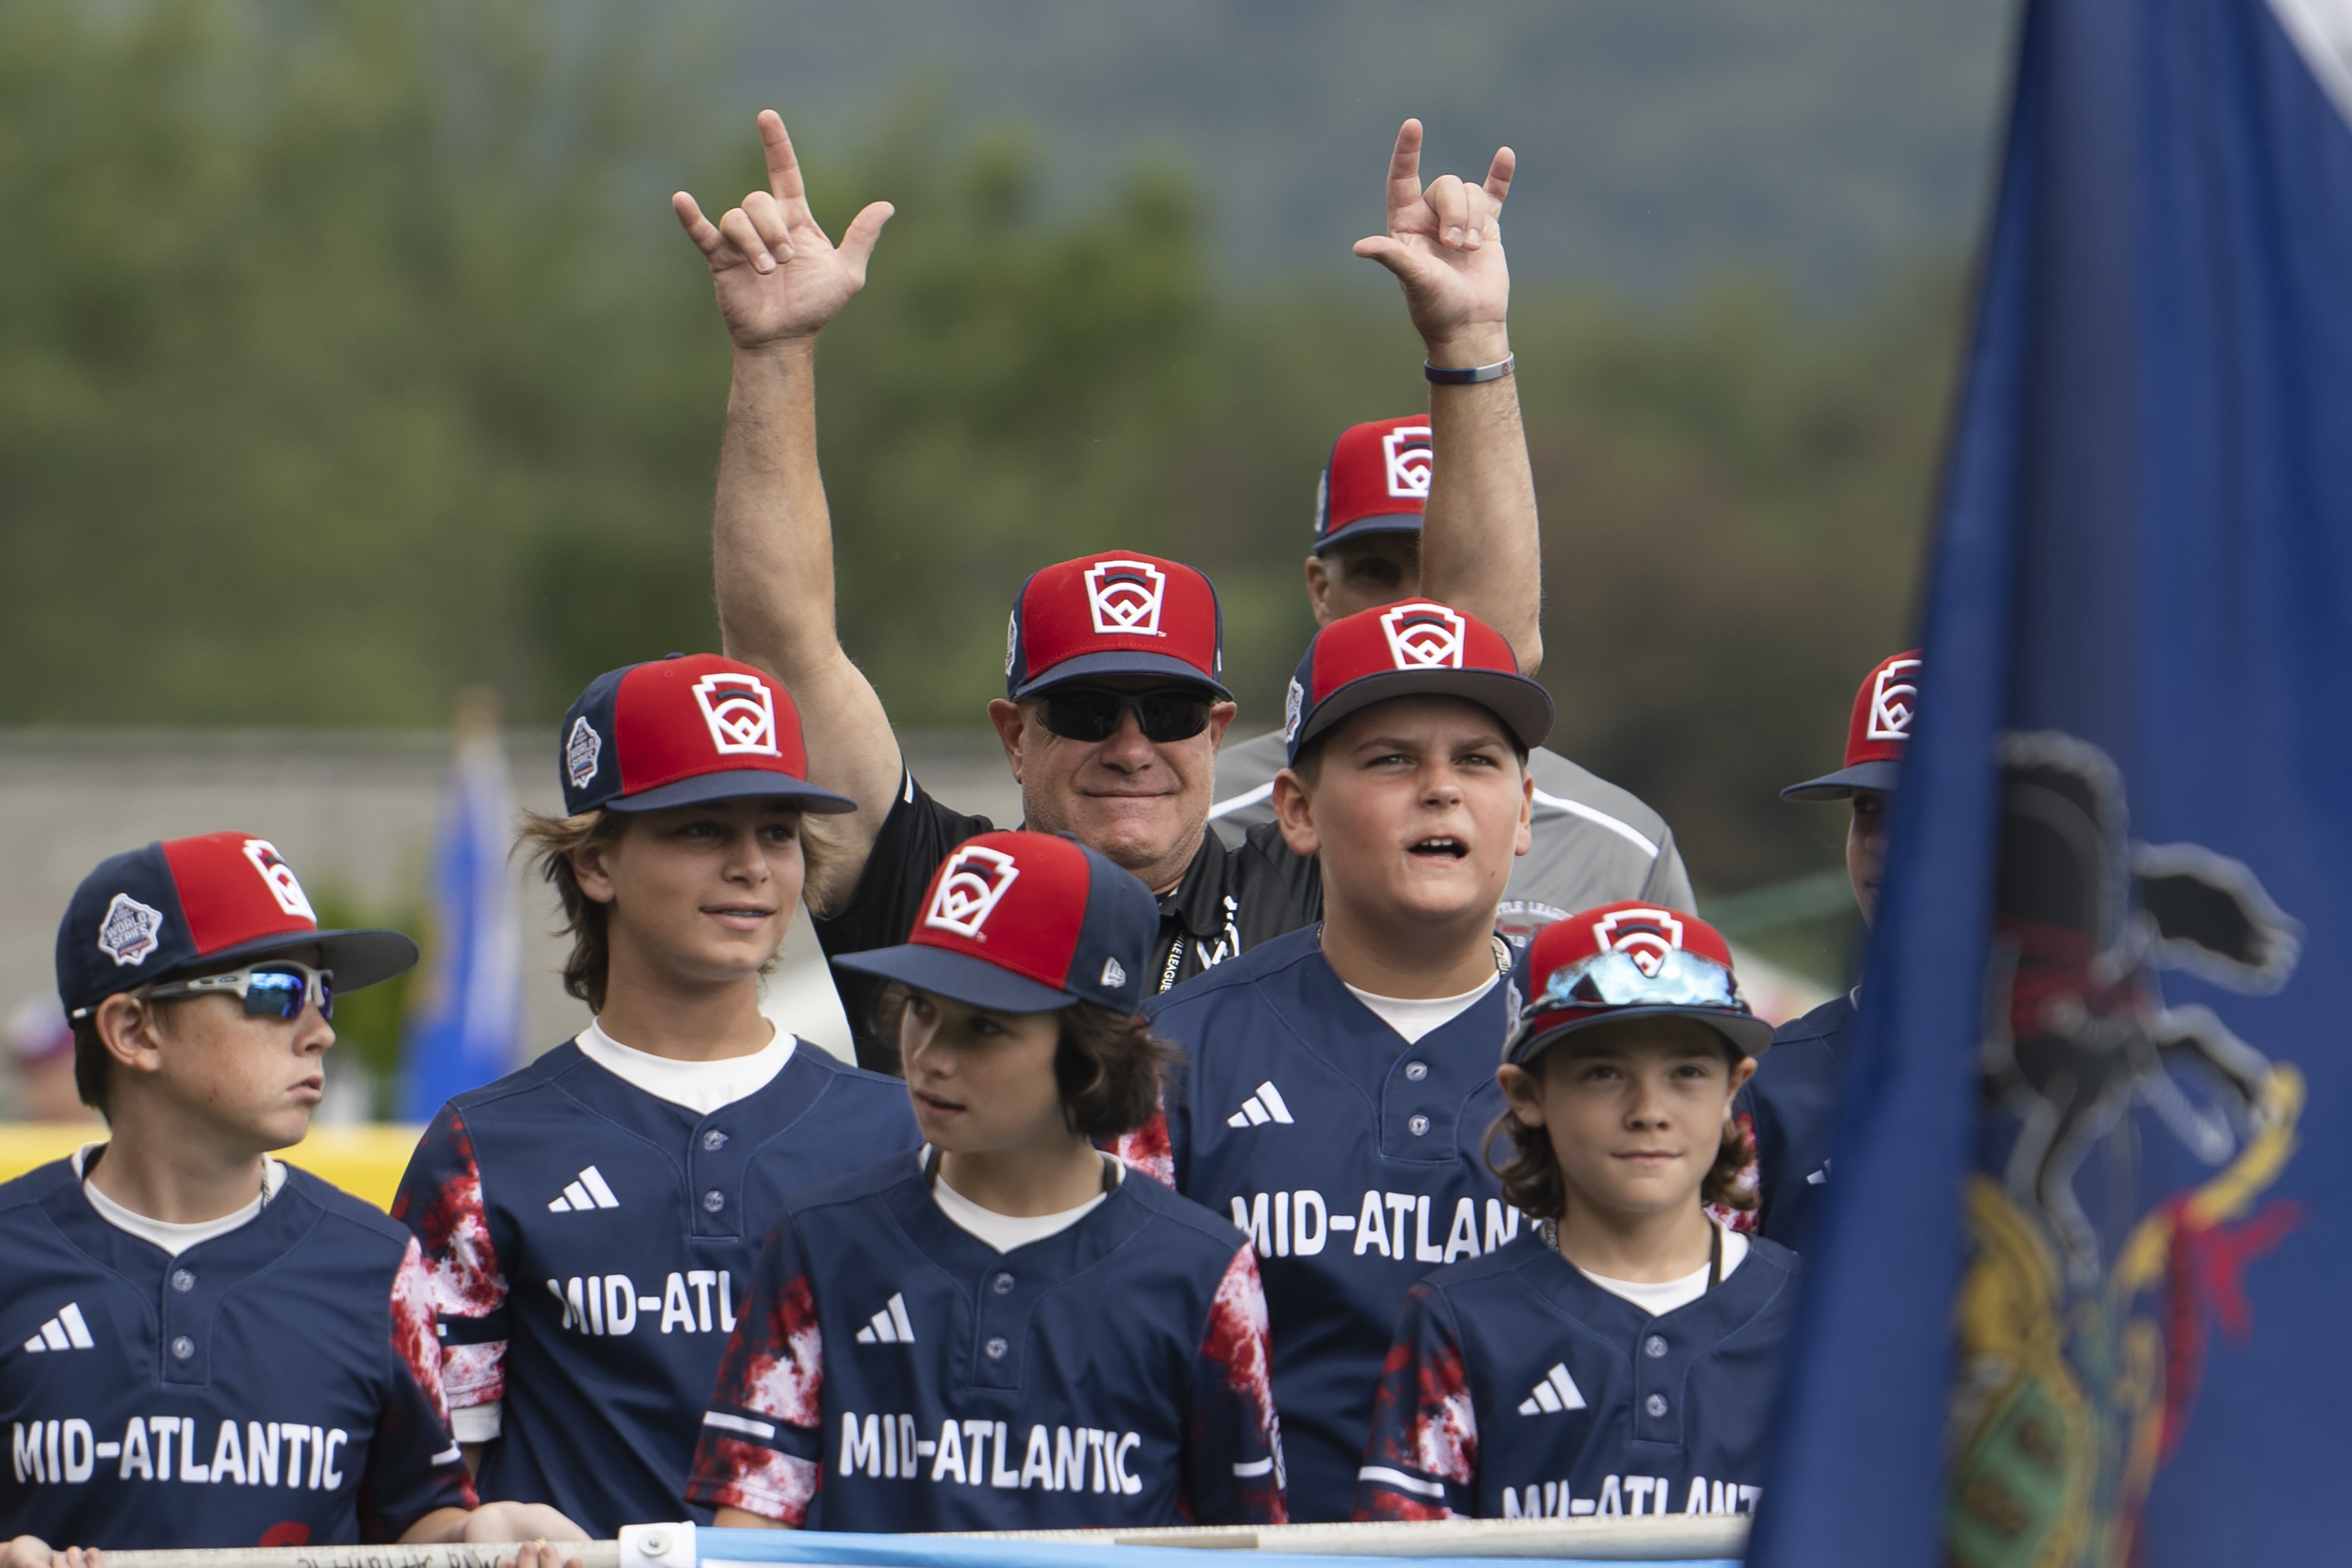 New Jersey leaning on history of resiliency after LLWS loss